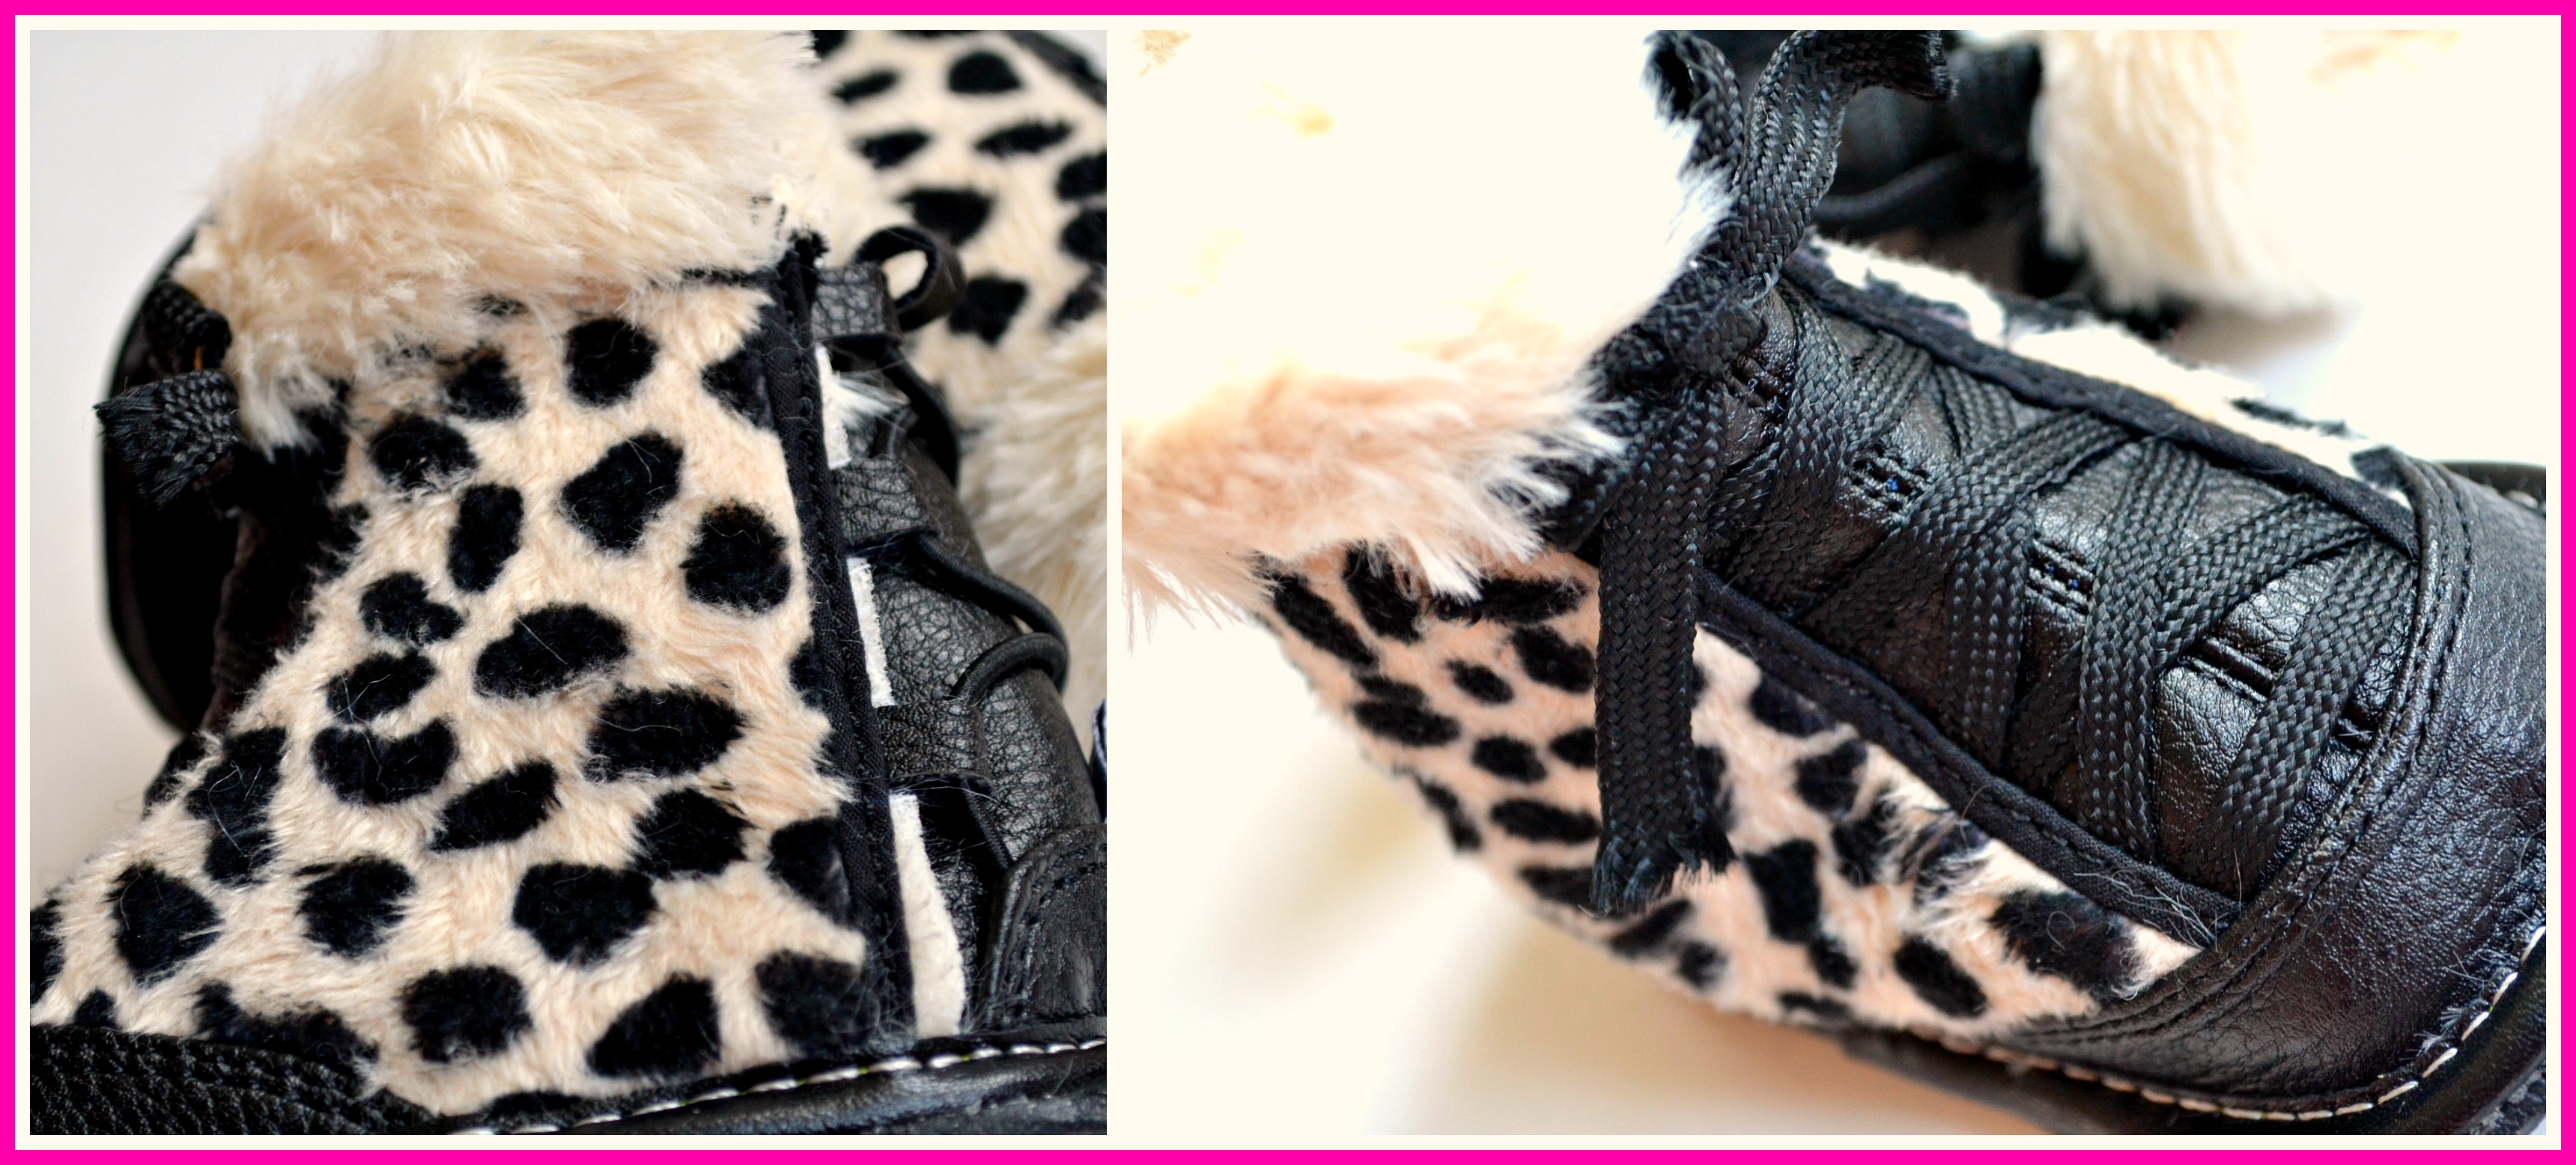 Jack & Lily: Leopard Laced Boots Review (Getting Ready For Baby Gift Guide)